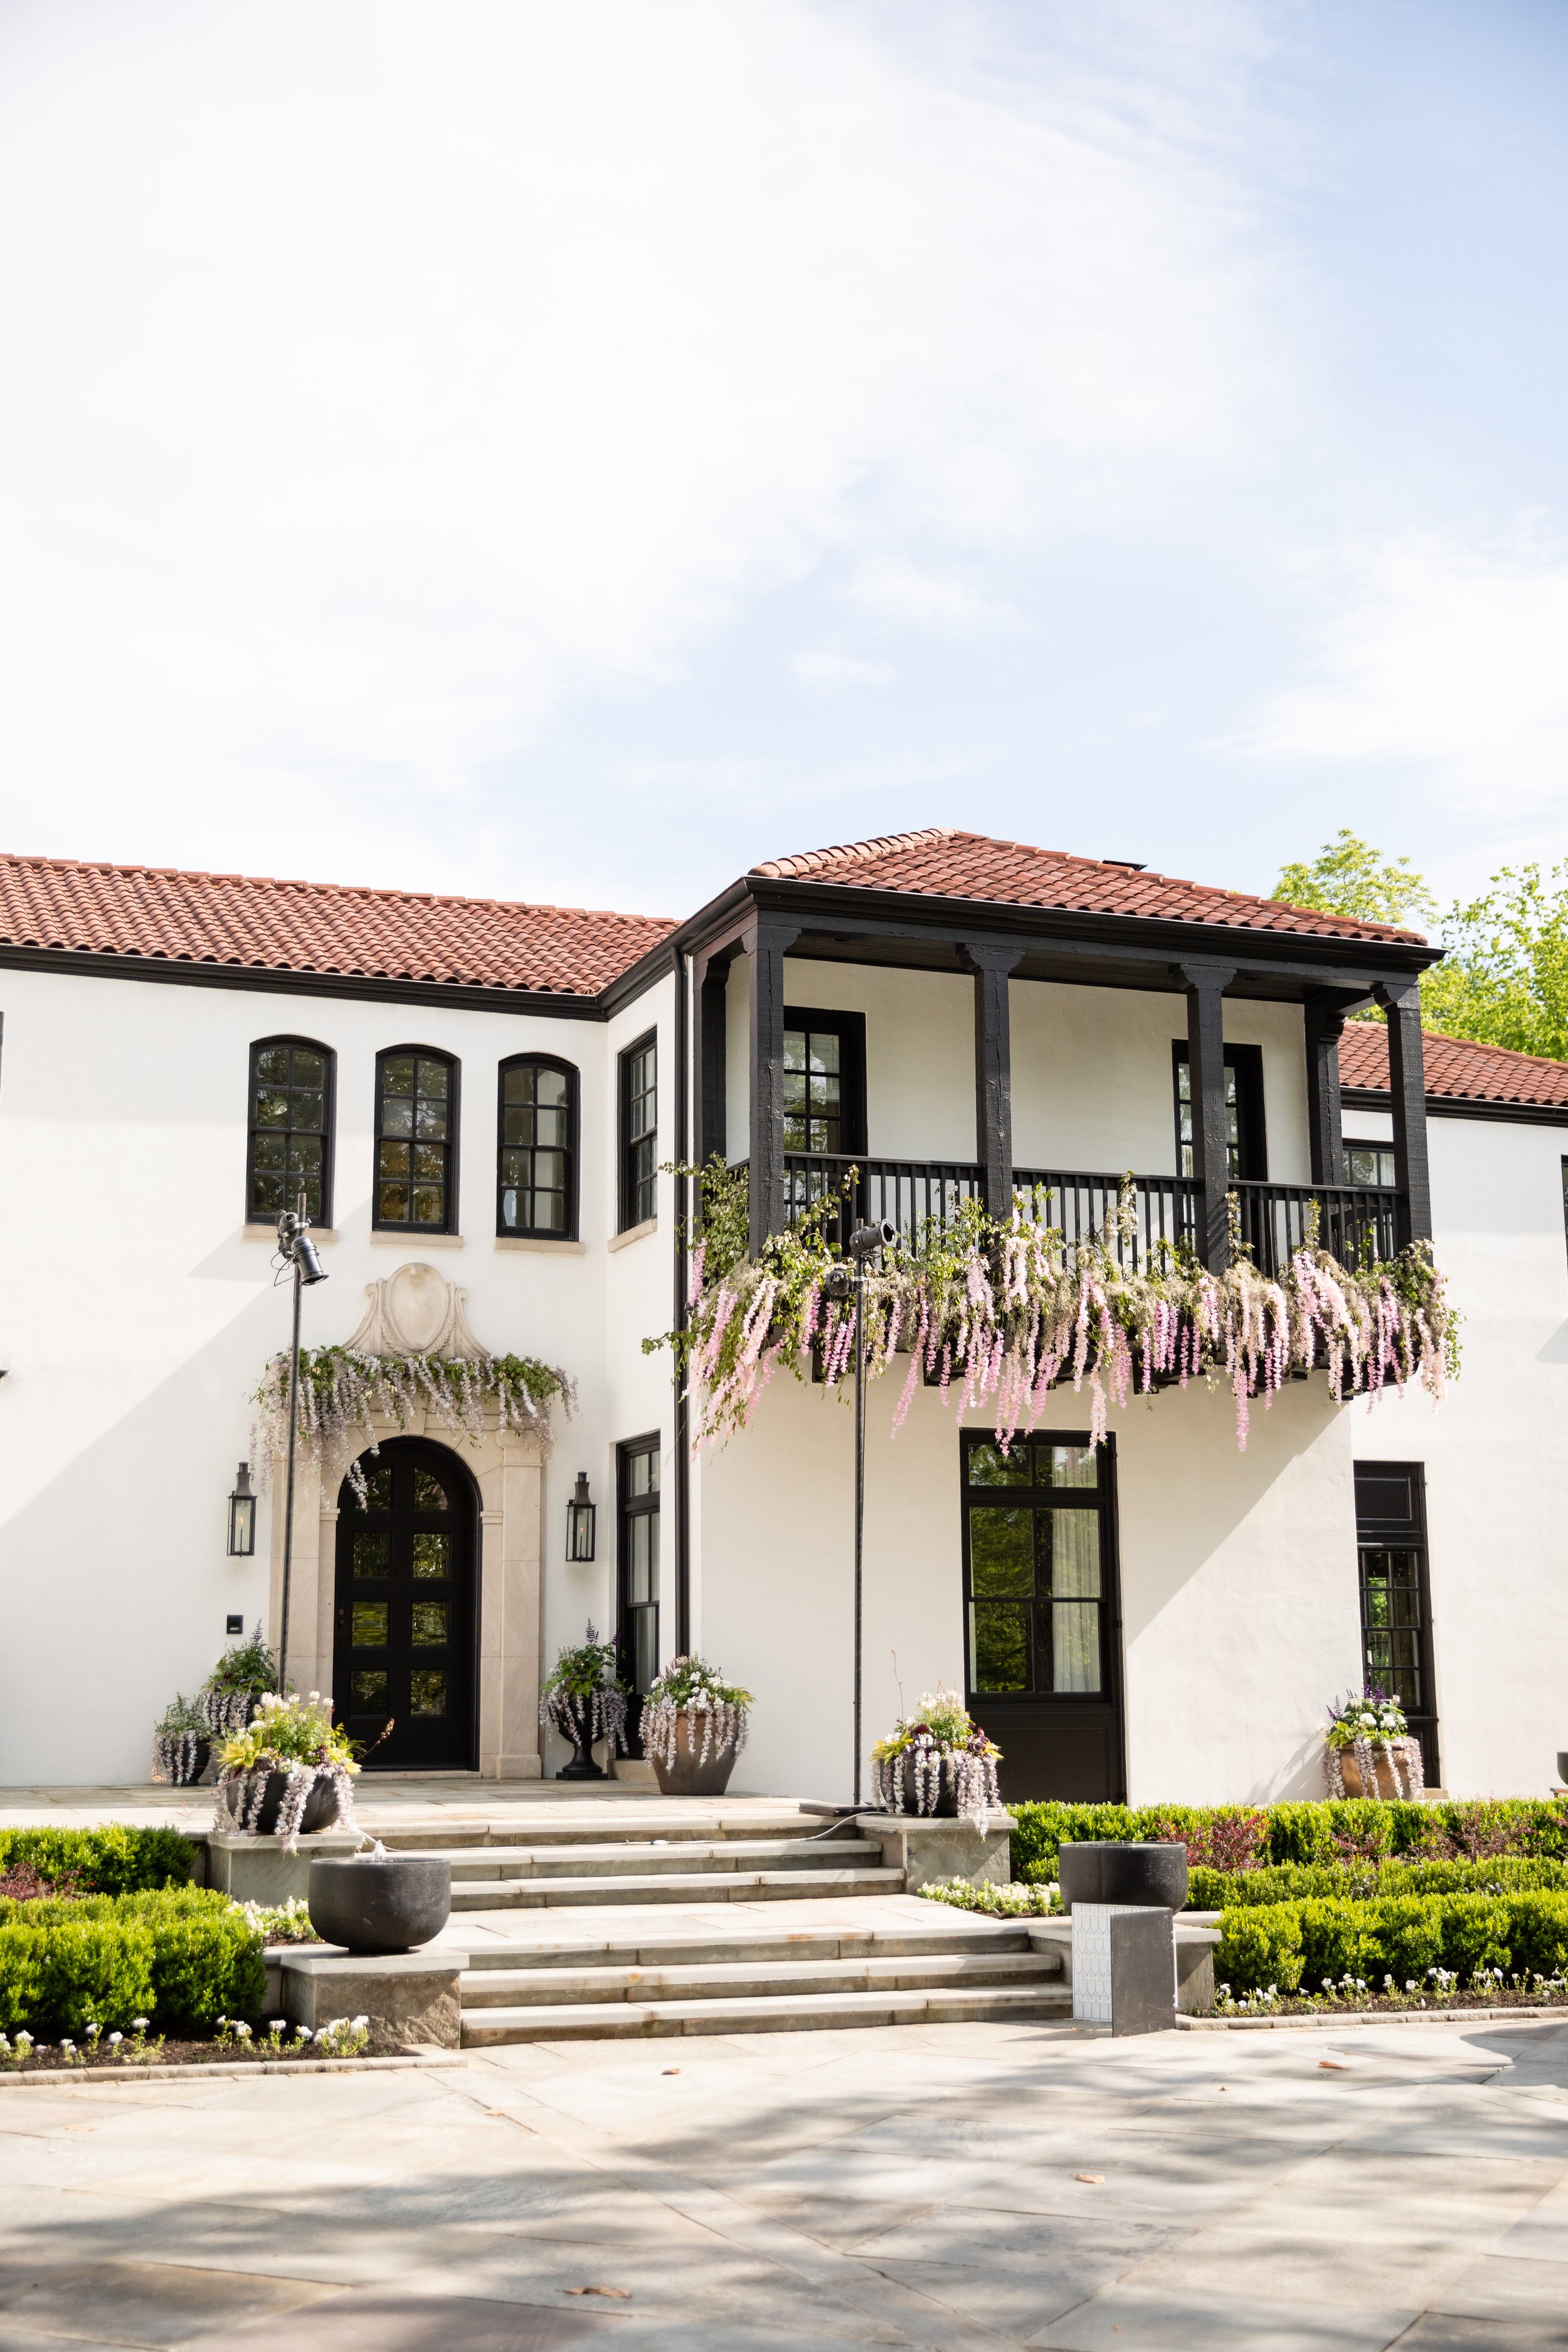 Bridgerton inspired engagement party at a private home in Nashville, TN with lush, organic floral installations of wisteria, spanish moss, and pastel blooms